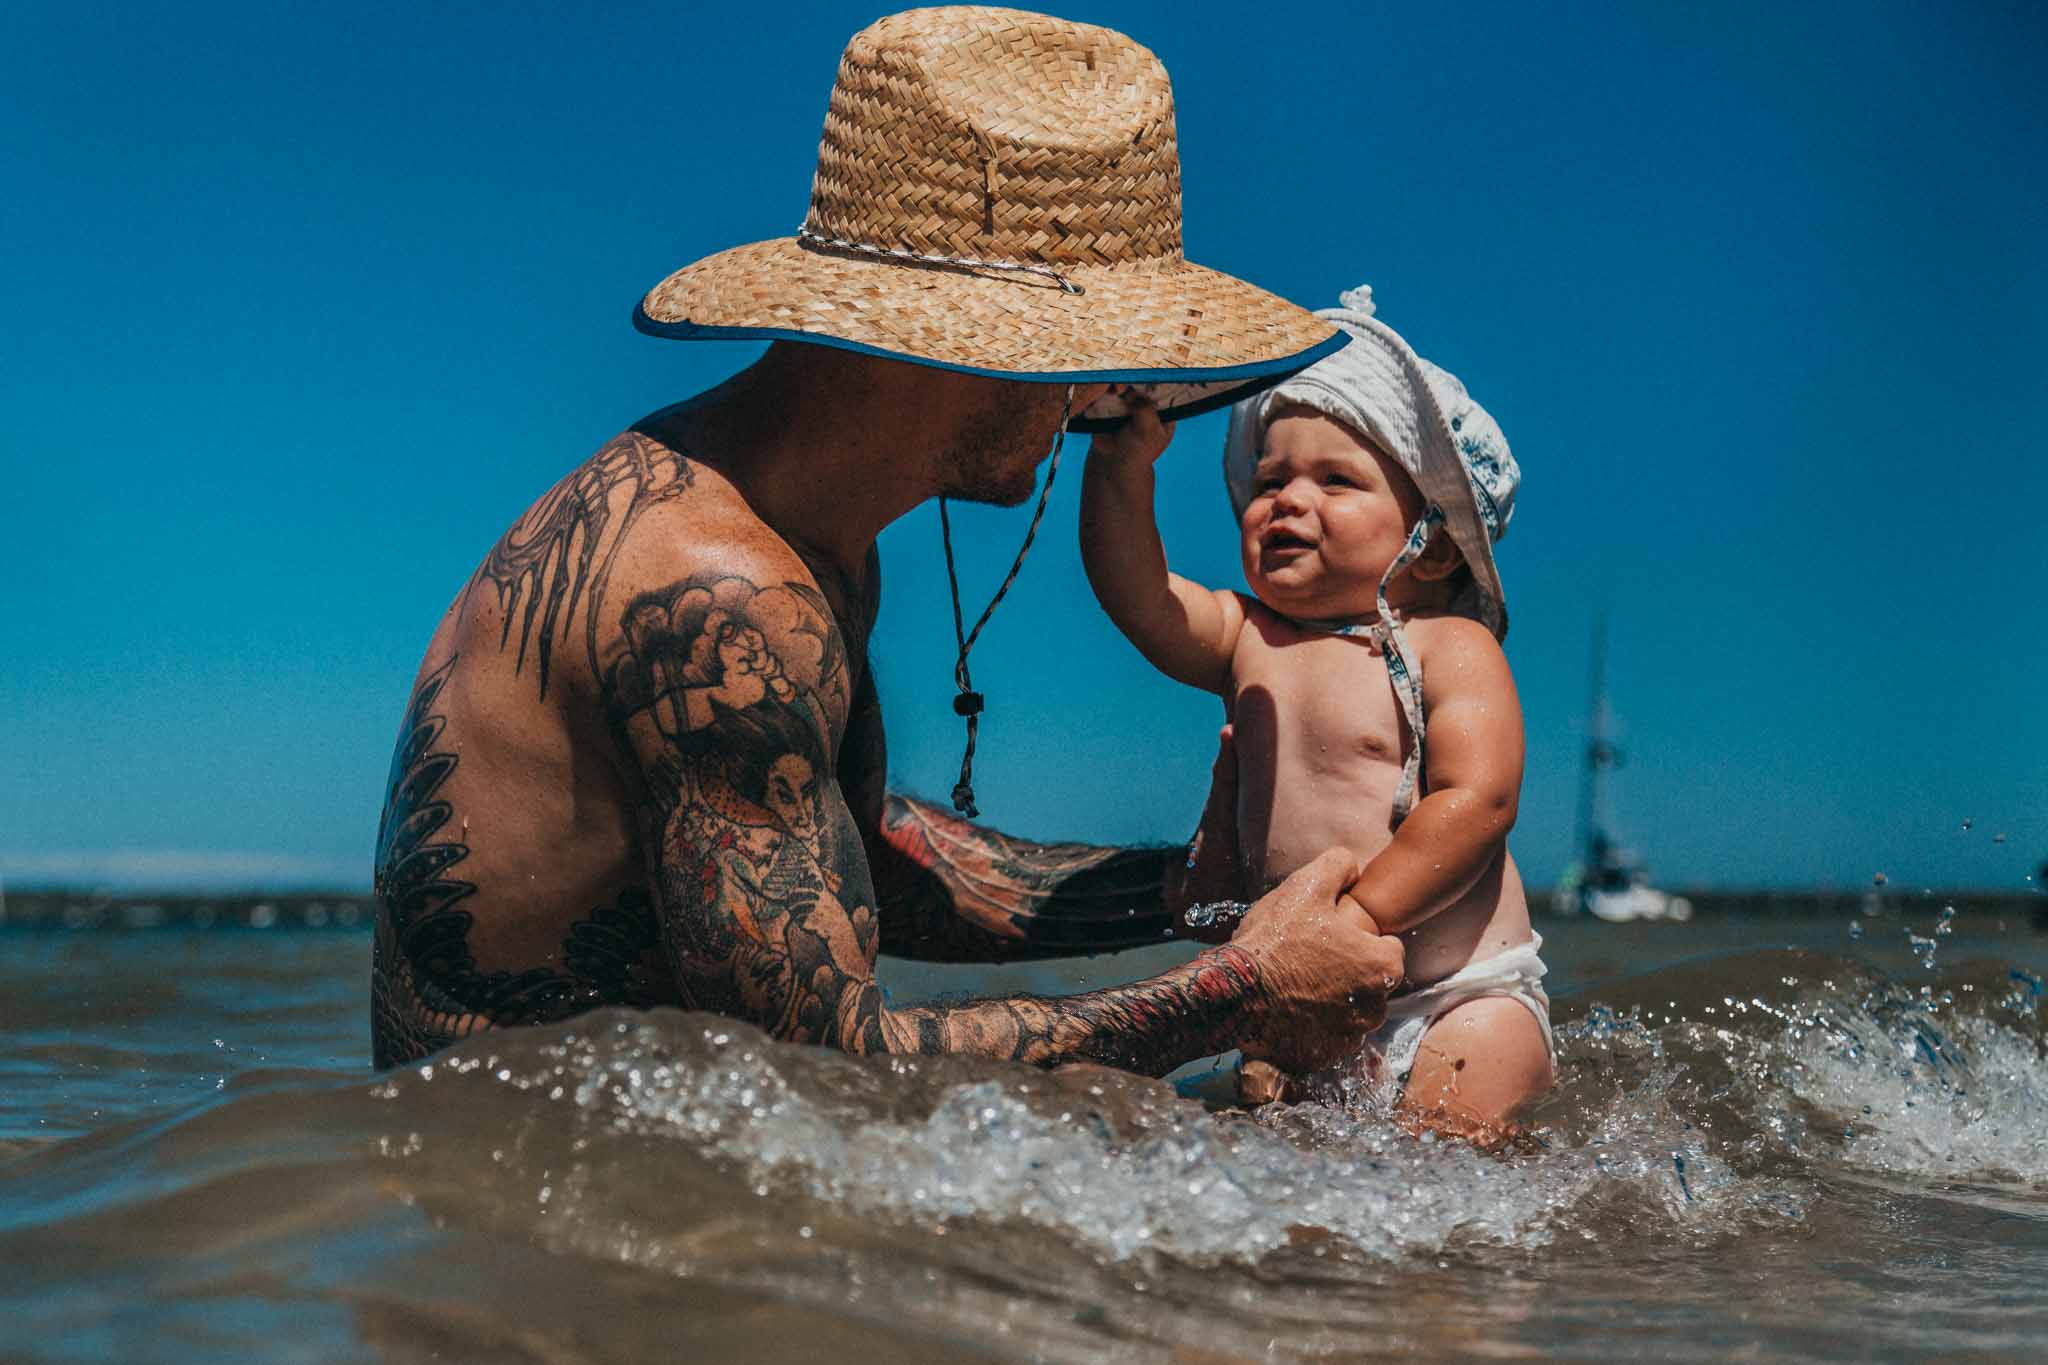 father-playing-with-baby-in-the-beach-with-baby-grabbing-onto-dads-hat-as-a-wave-approaches